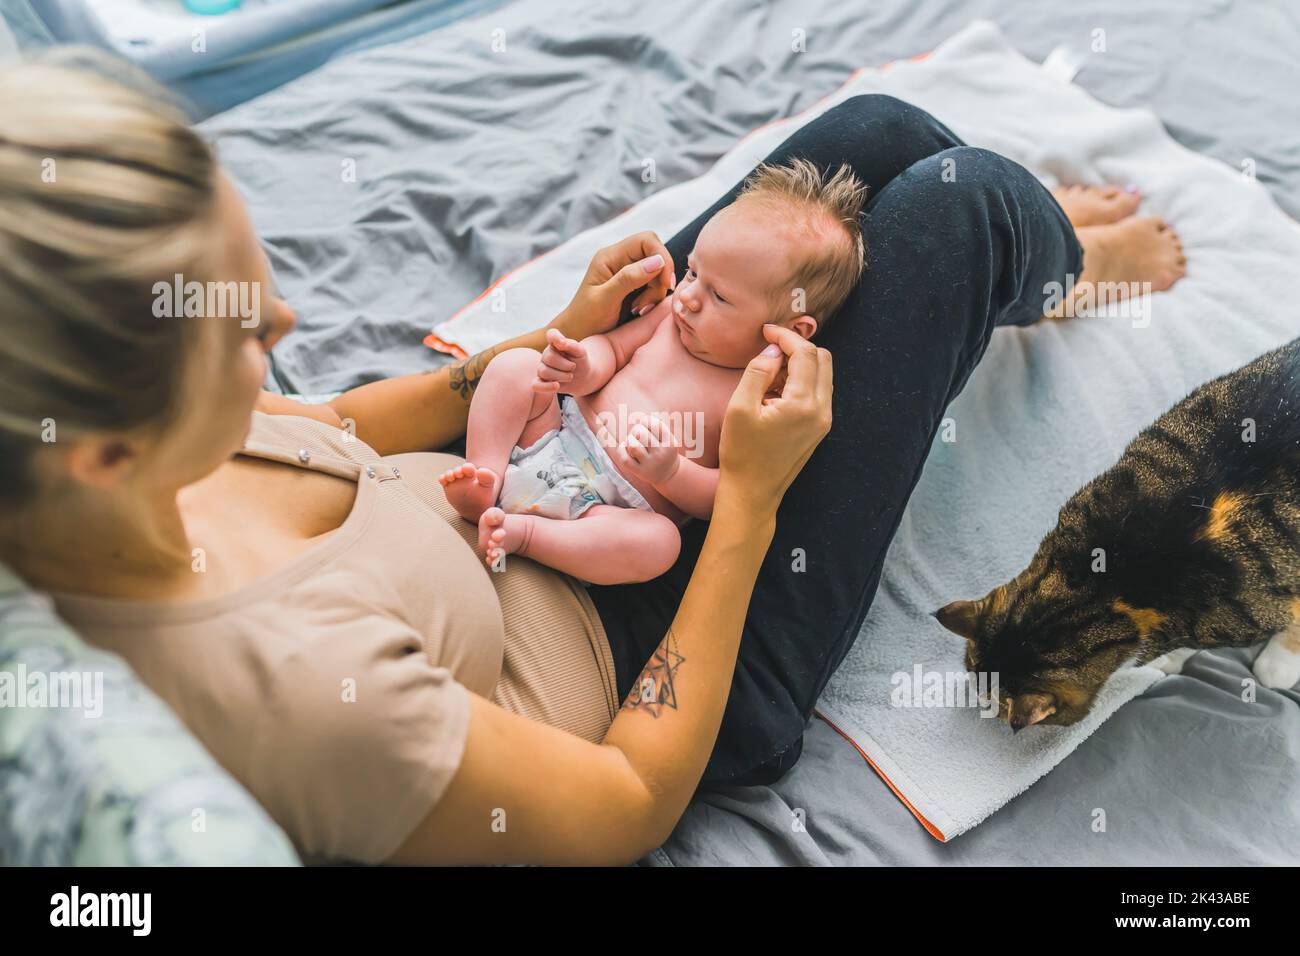 Young mother sitting on a bed, holding her newborn son with cute brown hair on her lap, communicating with him. Big multicolored cat sitting near them and sniffing the area. High quality photo Stock Photo